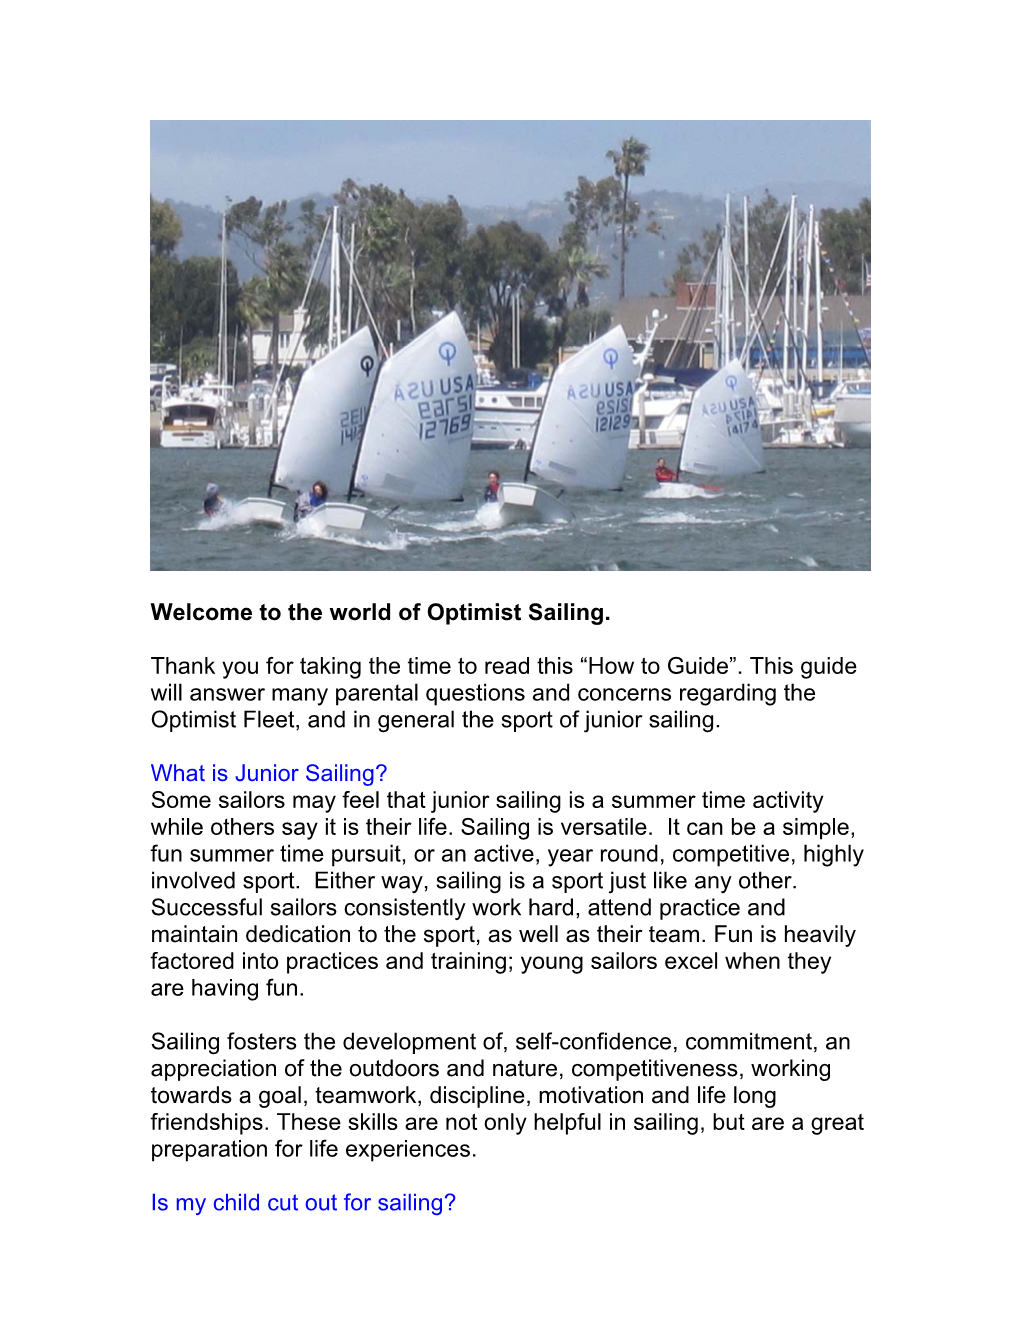 Welcome to the World of Optimist Sailing. Thank You for Taking the Time to Read This